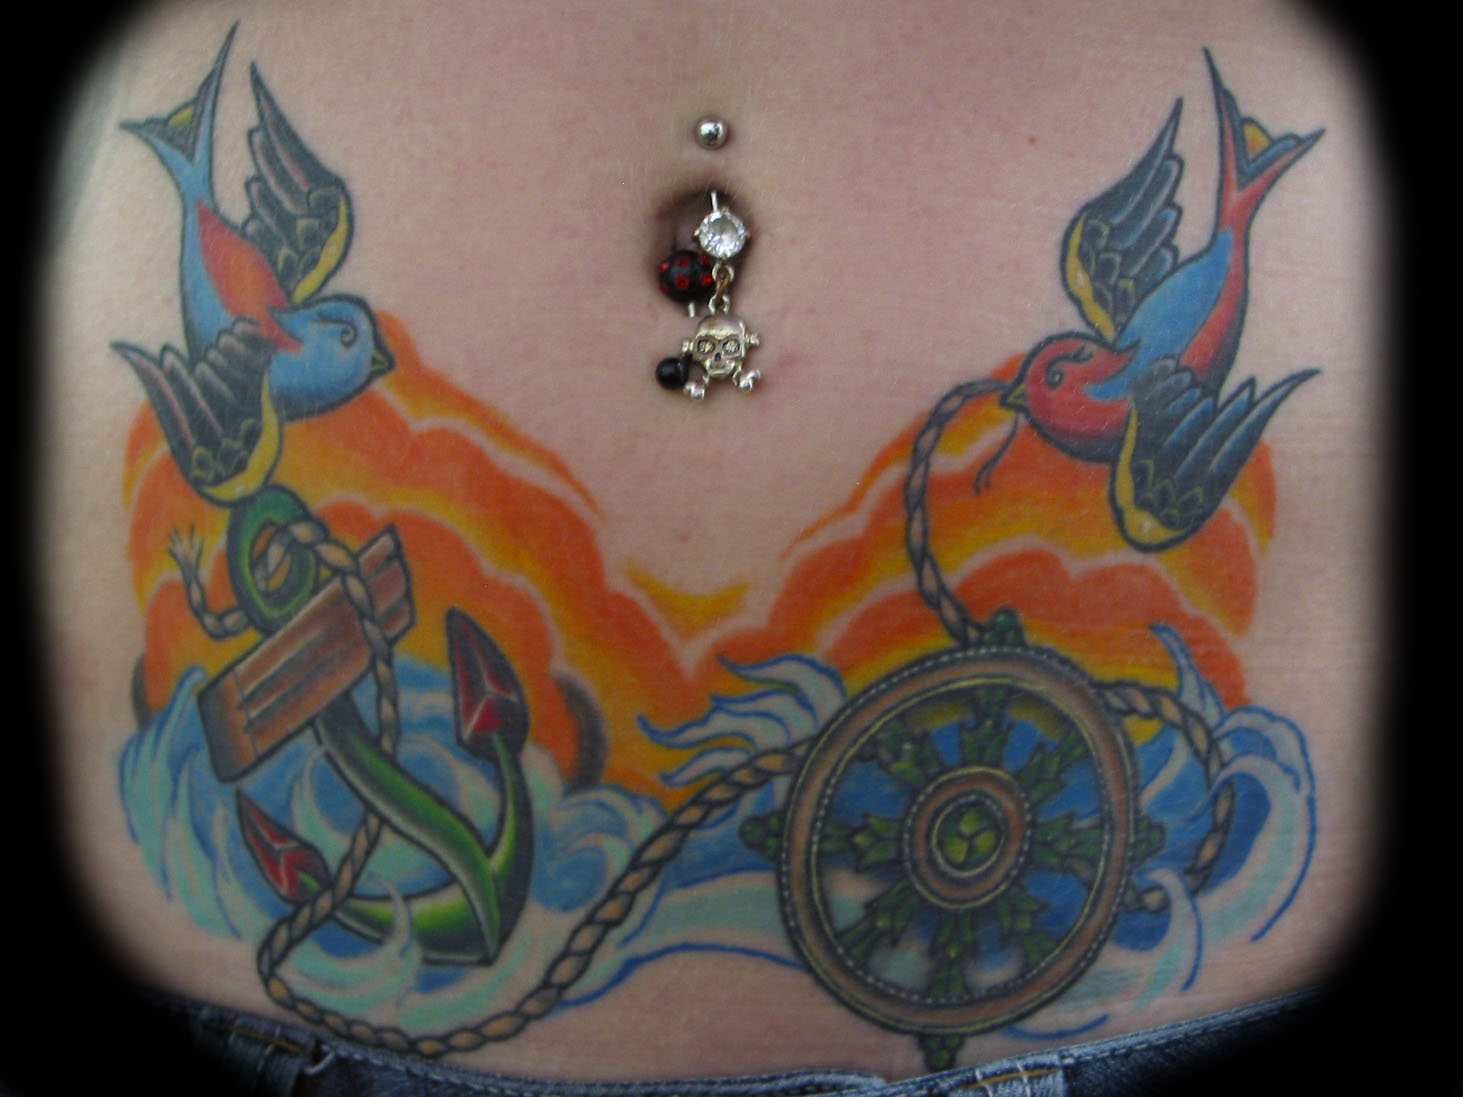 26 Nice Stomach Tattoo Images, Pictures And Ideas.